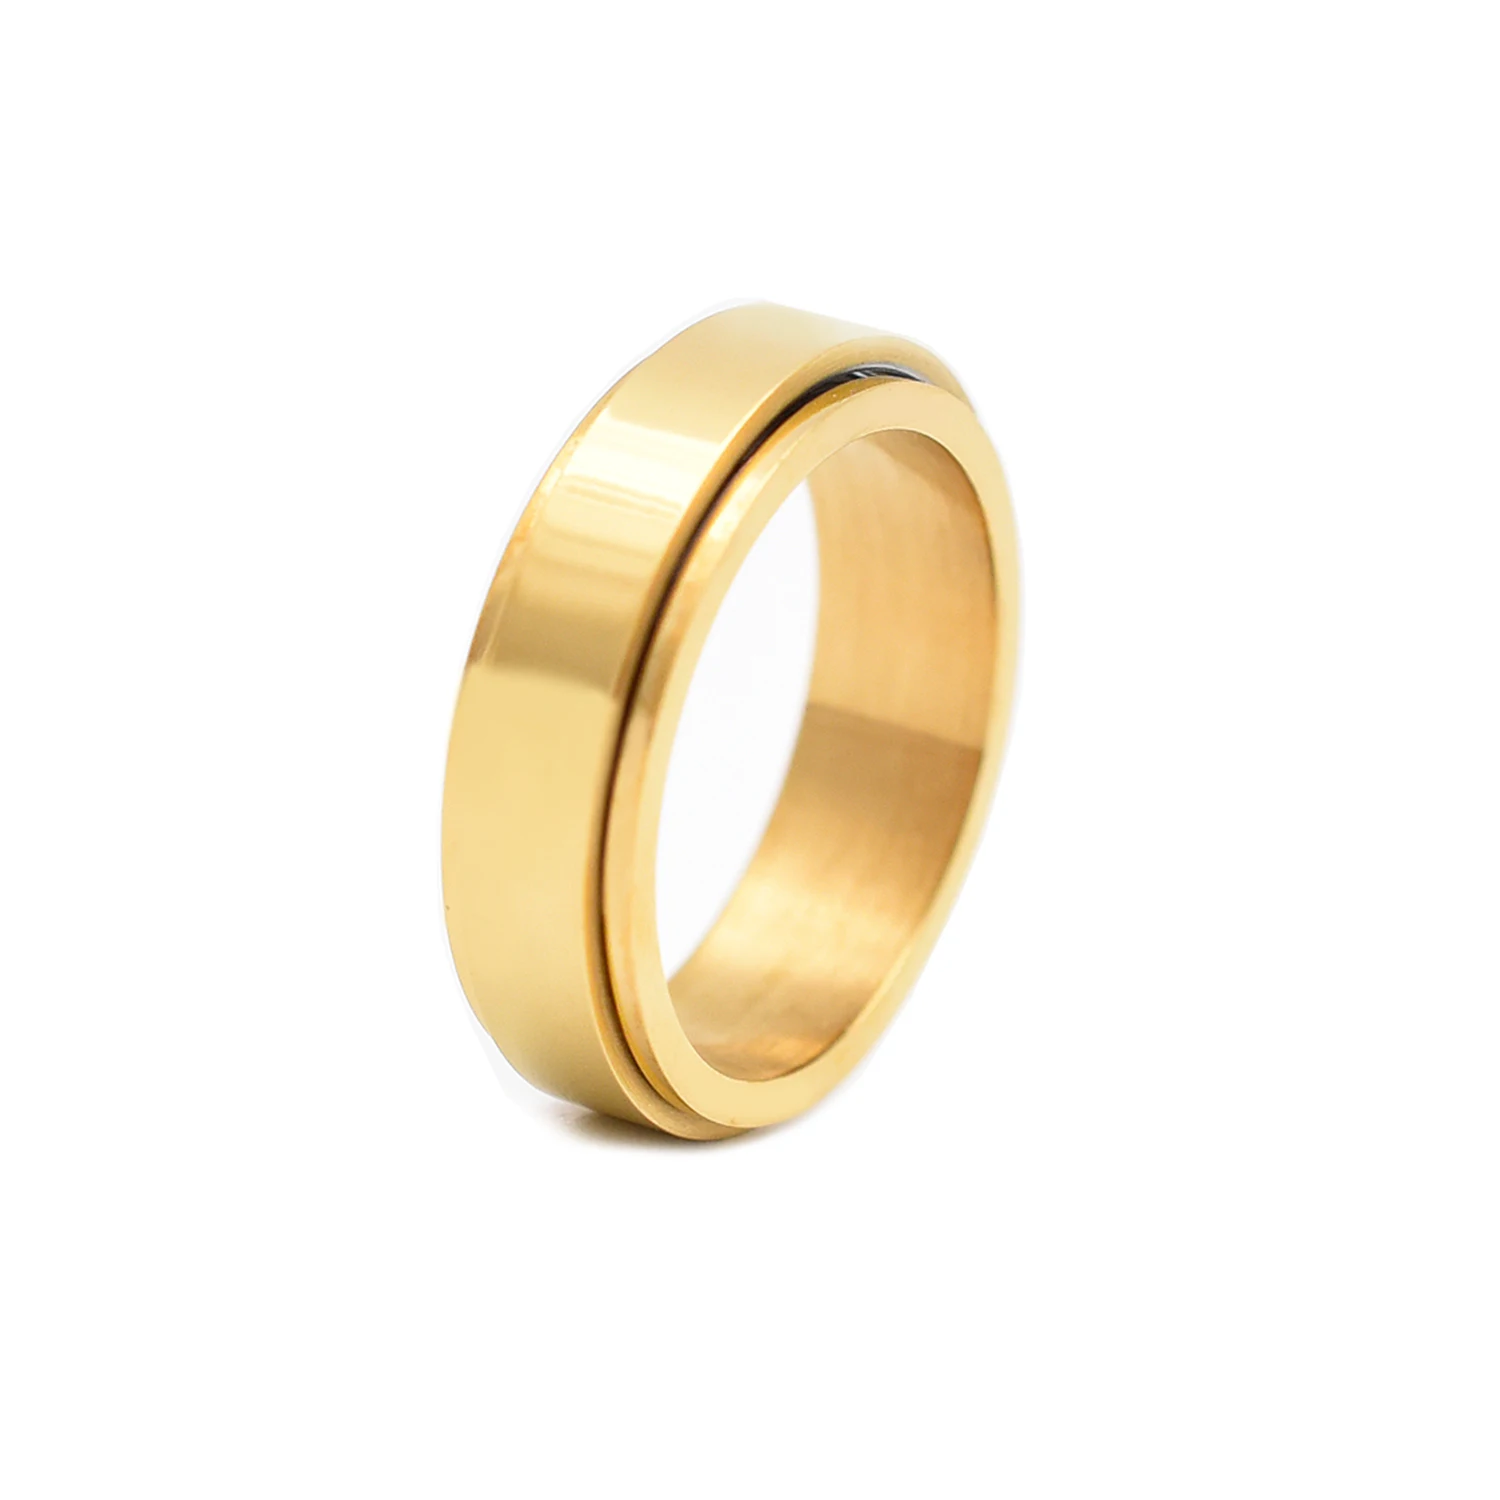 New Design Stainless Steel Little Boy Band With 12mm Wide Black Hills Gold  Rings High Quality Unisex Fashion Jewelry For Women And Girls From  Pingwang3, $75.38 | DHgate.Com